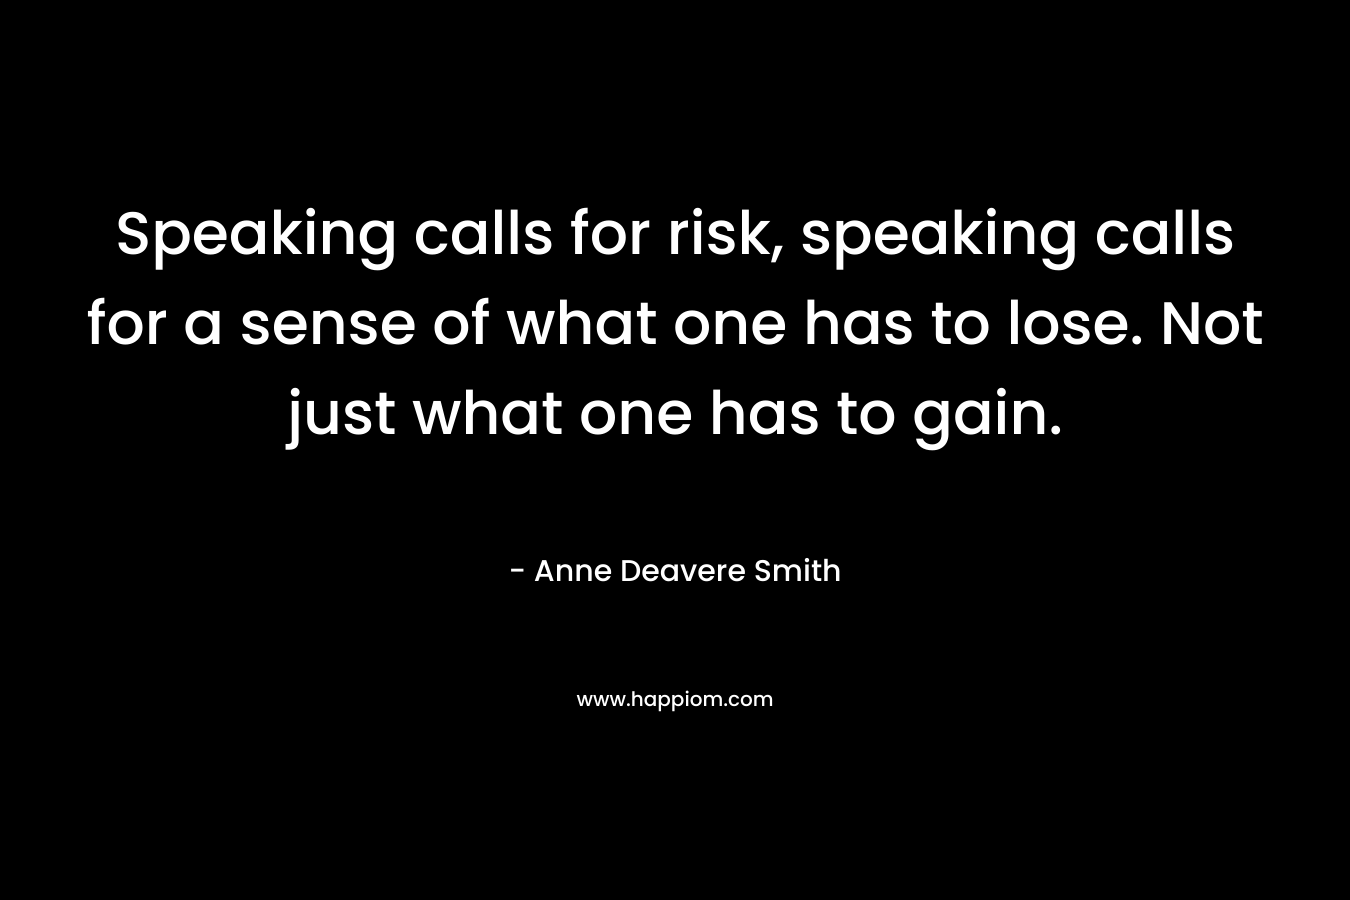 Speaking calls for risk, speaking calls for a sense of what one has to lose. Not just what one has to gain.